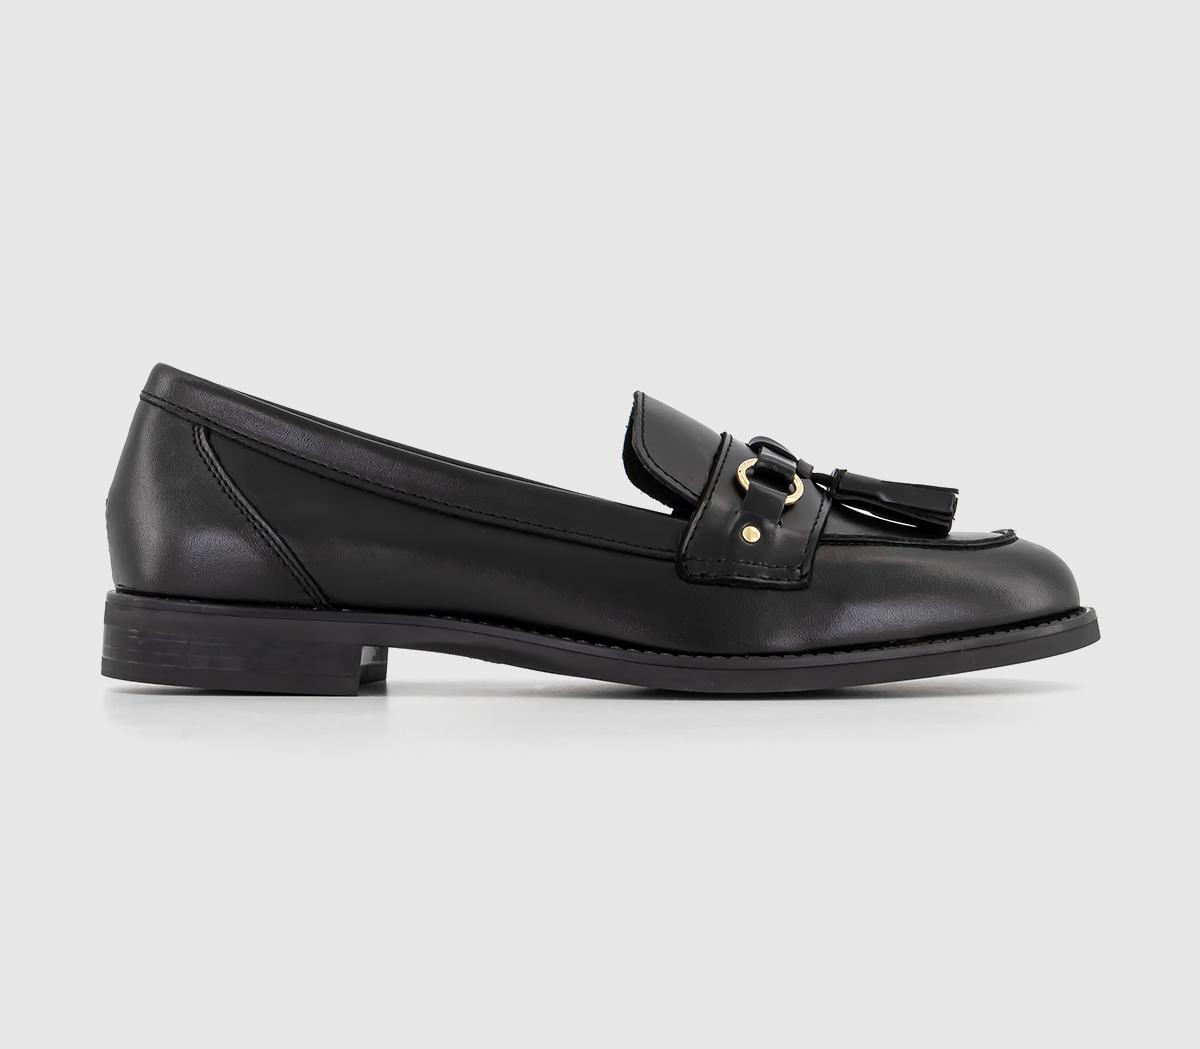 OFFICE Founder Leather Trim Tassel Loafers Black Leather - Flat Shoes ...